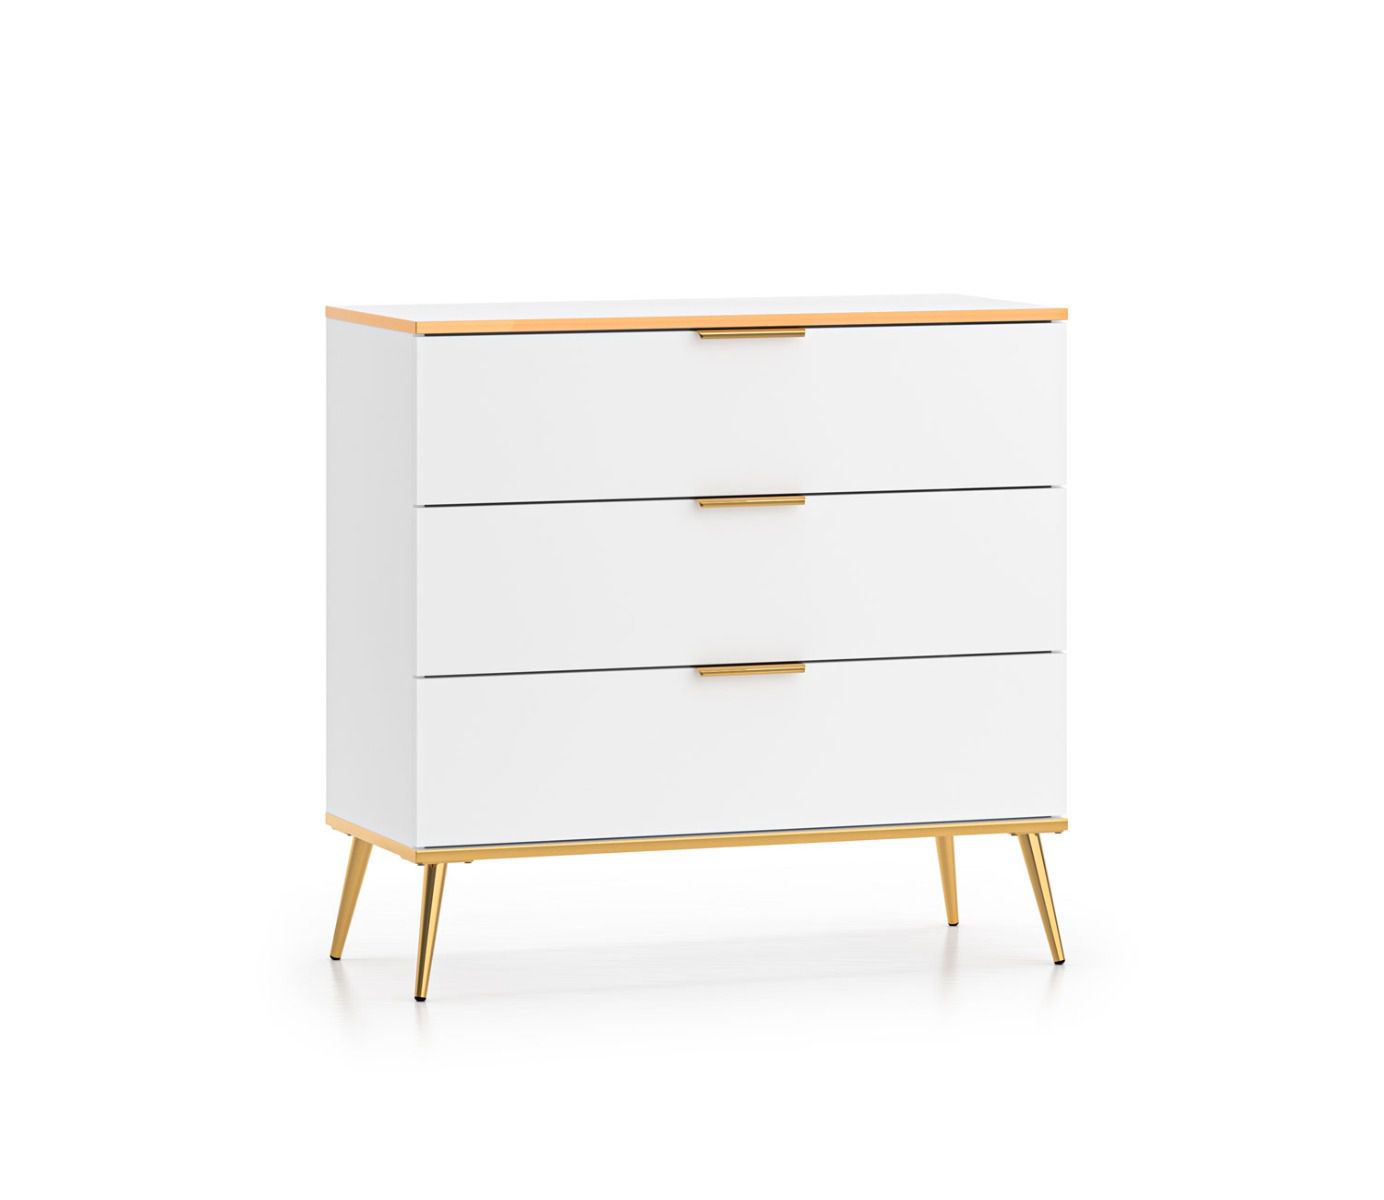 Stylish chest of drawers with soft-close system Breckenridge 05, color: white, three drawers, for living room, dimensions: 88 x 92 x 40 cm, high-quality workmanship